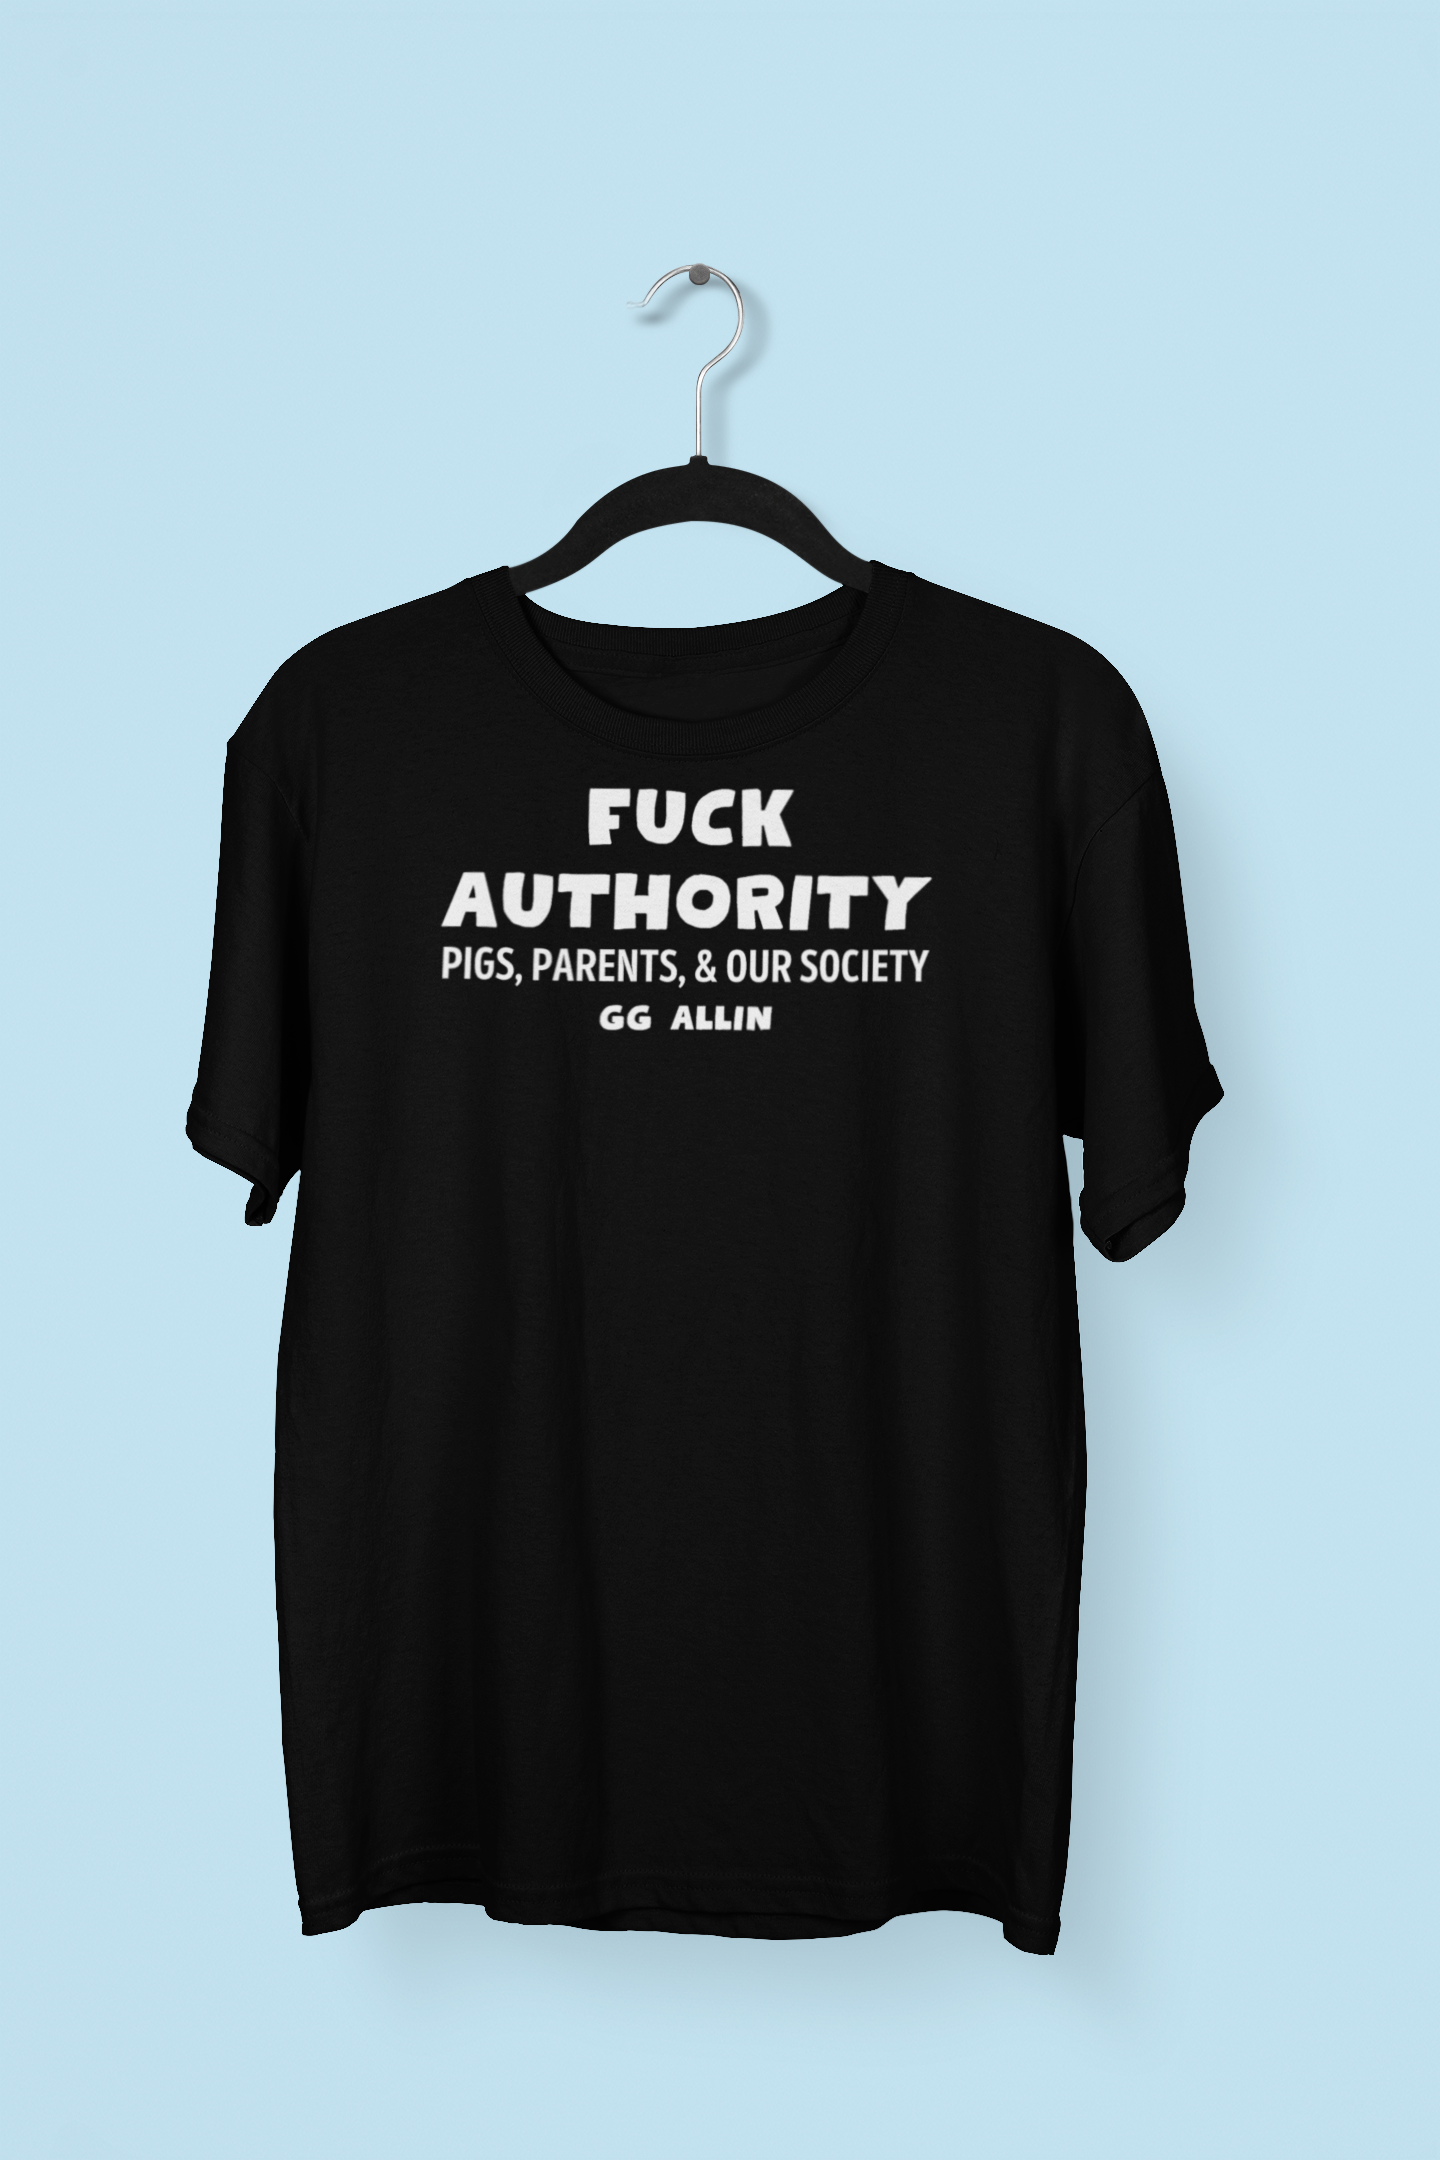 GG Allin Fuck Authority Pigs Parents & Our Society T-shirt, Offensive Punk Rock Shirt